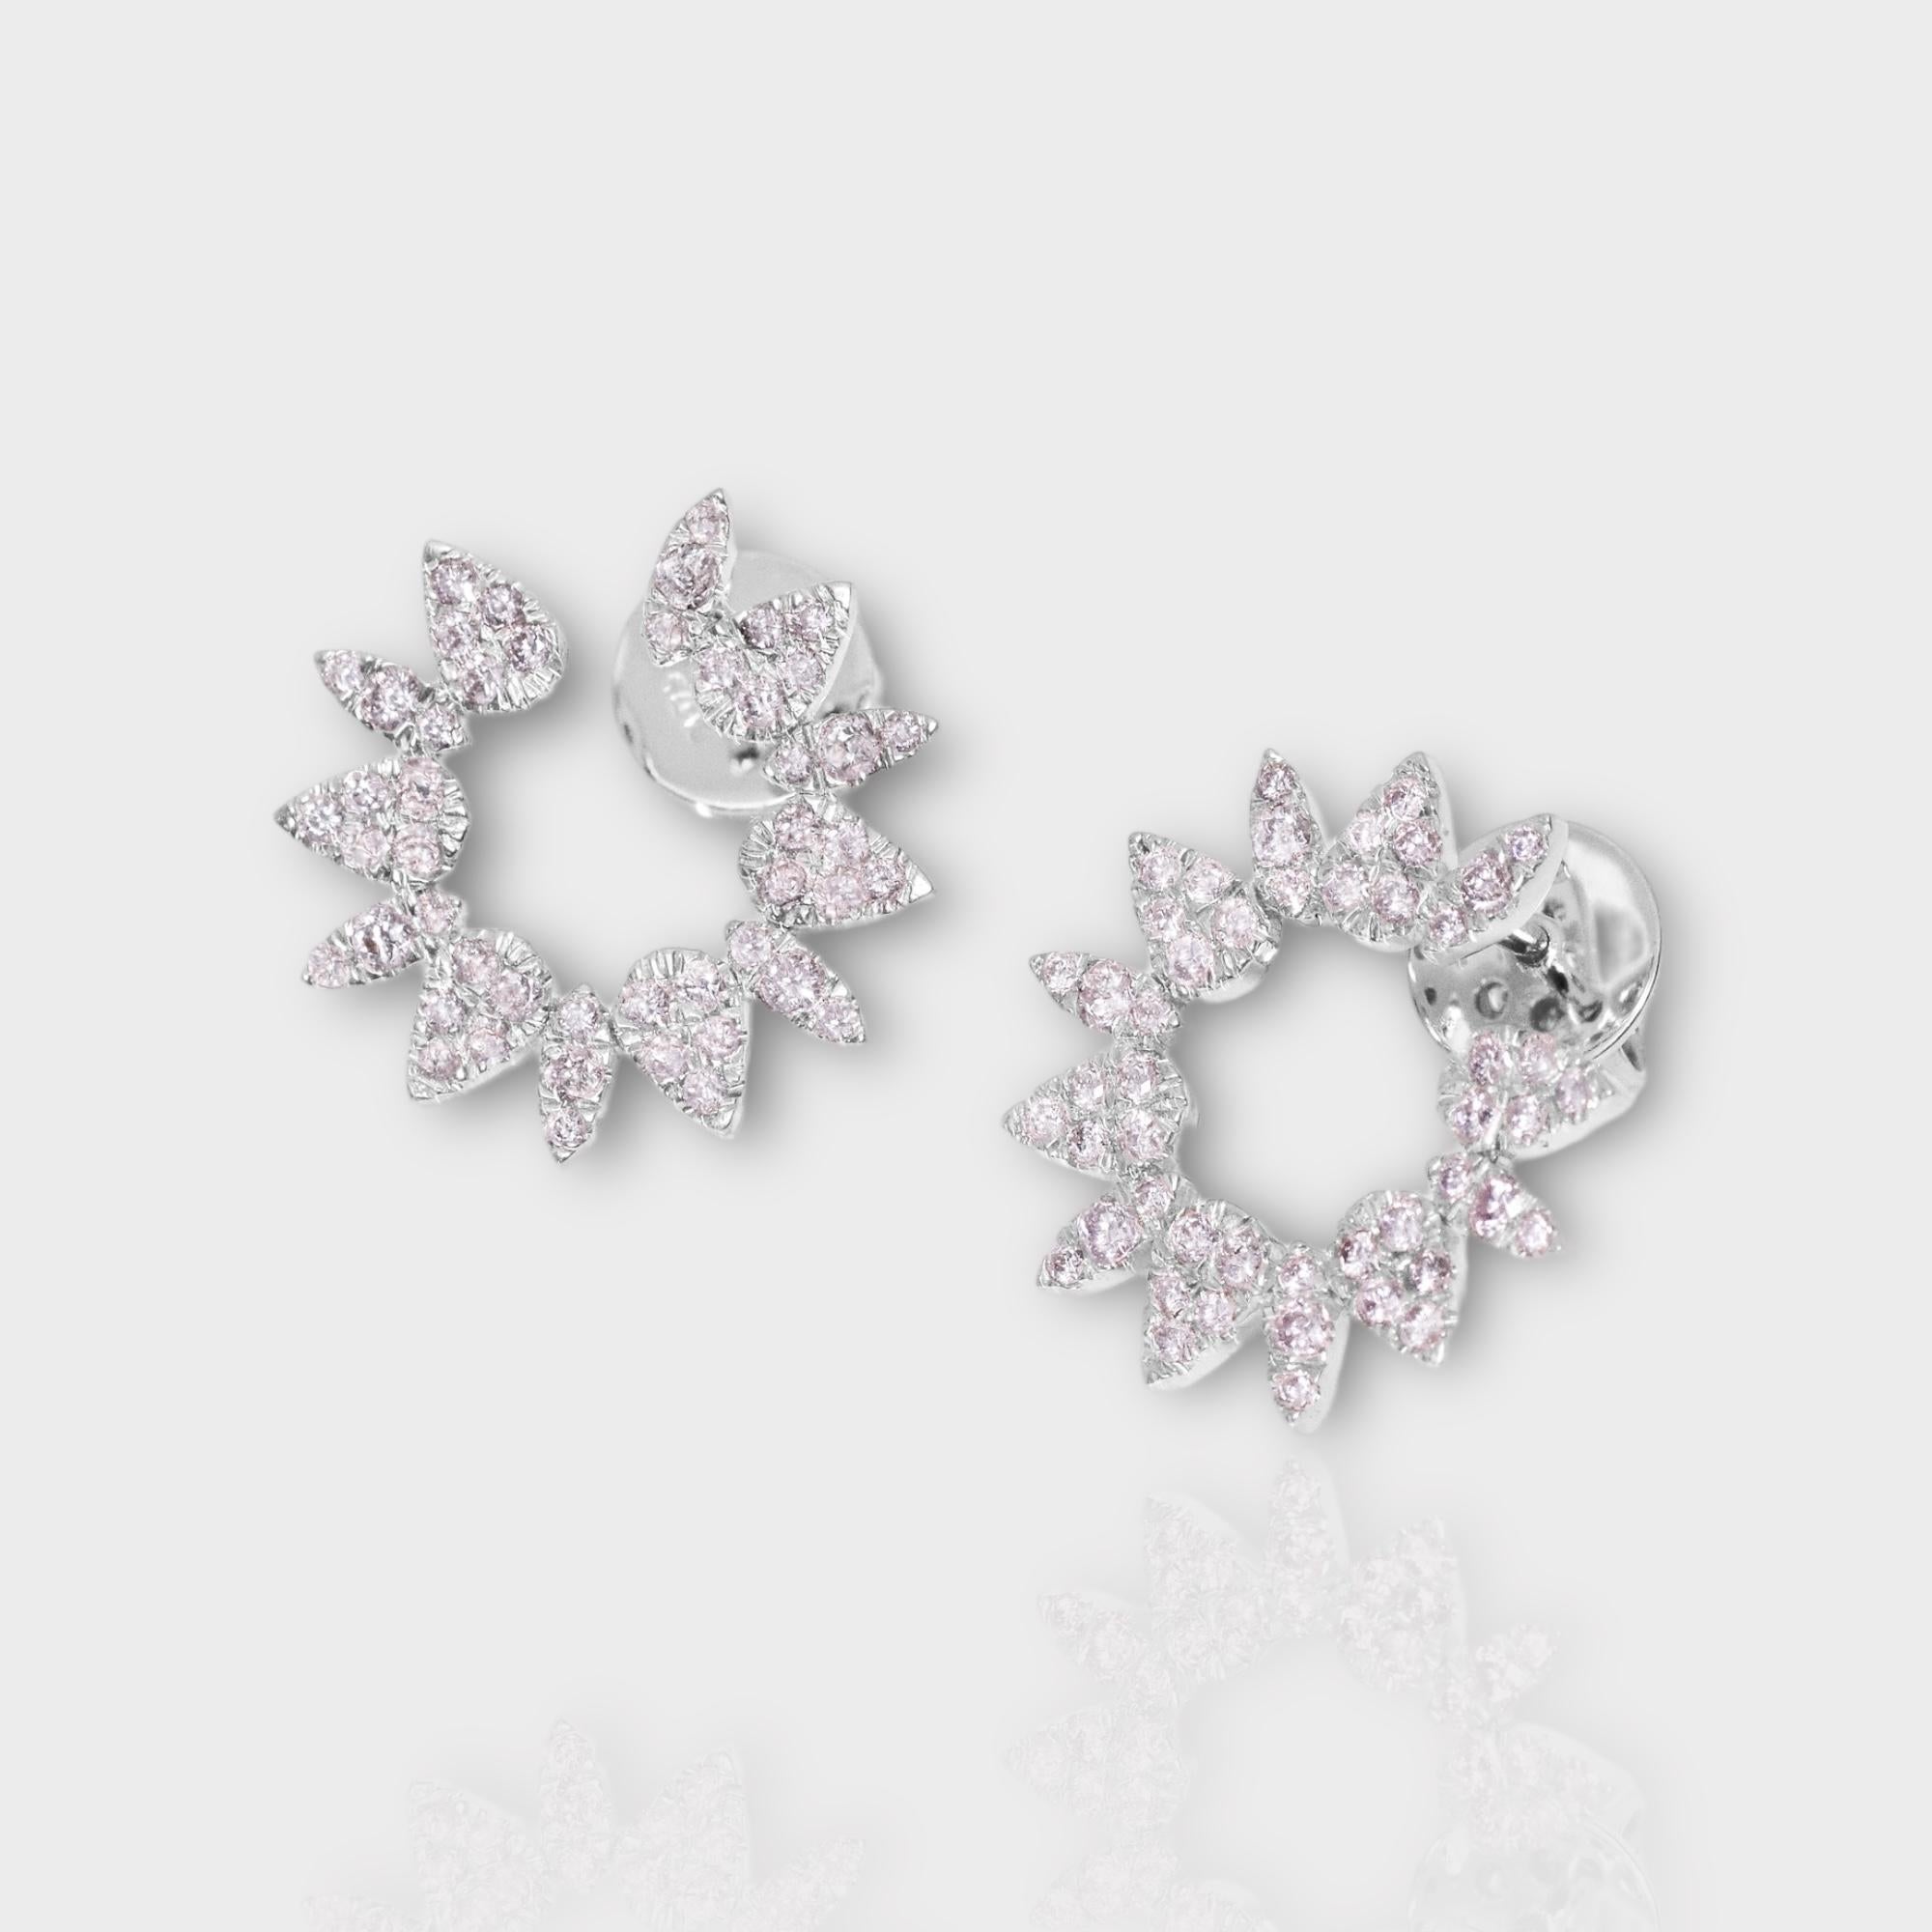 *IGI 14K 0.84 ct Natural Pink Diamonds Radiant Design Stud Earrings*

This band features a stunning design with a radiant crafted from 14K white gold. It is set with natural pink diamonds weighing 0.84 carats.

These earrings feature colorful